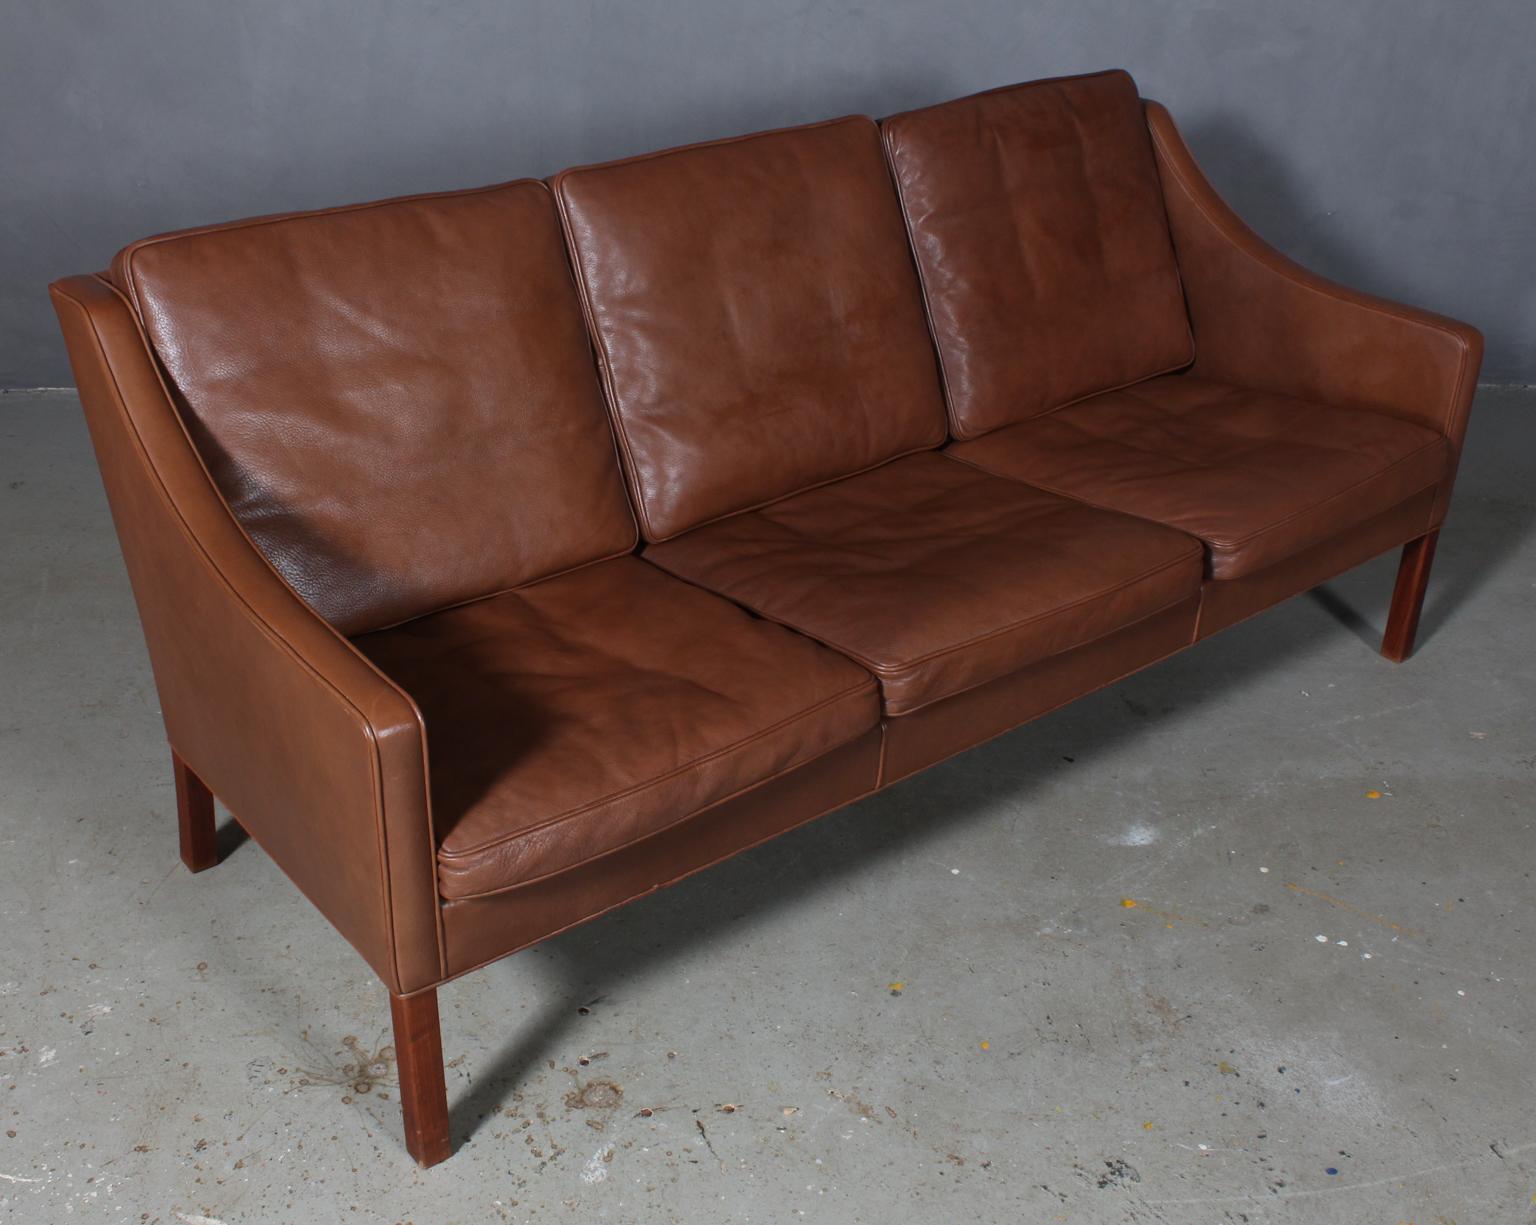 Børge Mogensen three-seat sofa original upholstered in brown leather.

Legs of teak.

Model 2209, made by Fredericia Furniture.